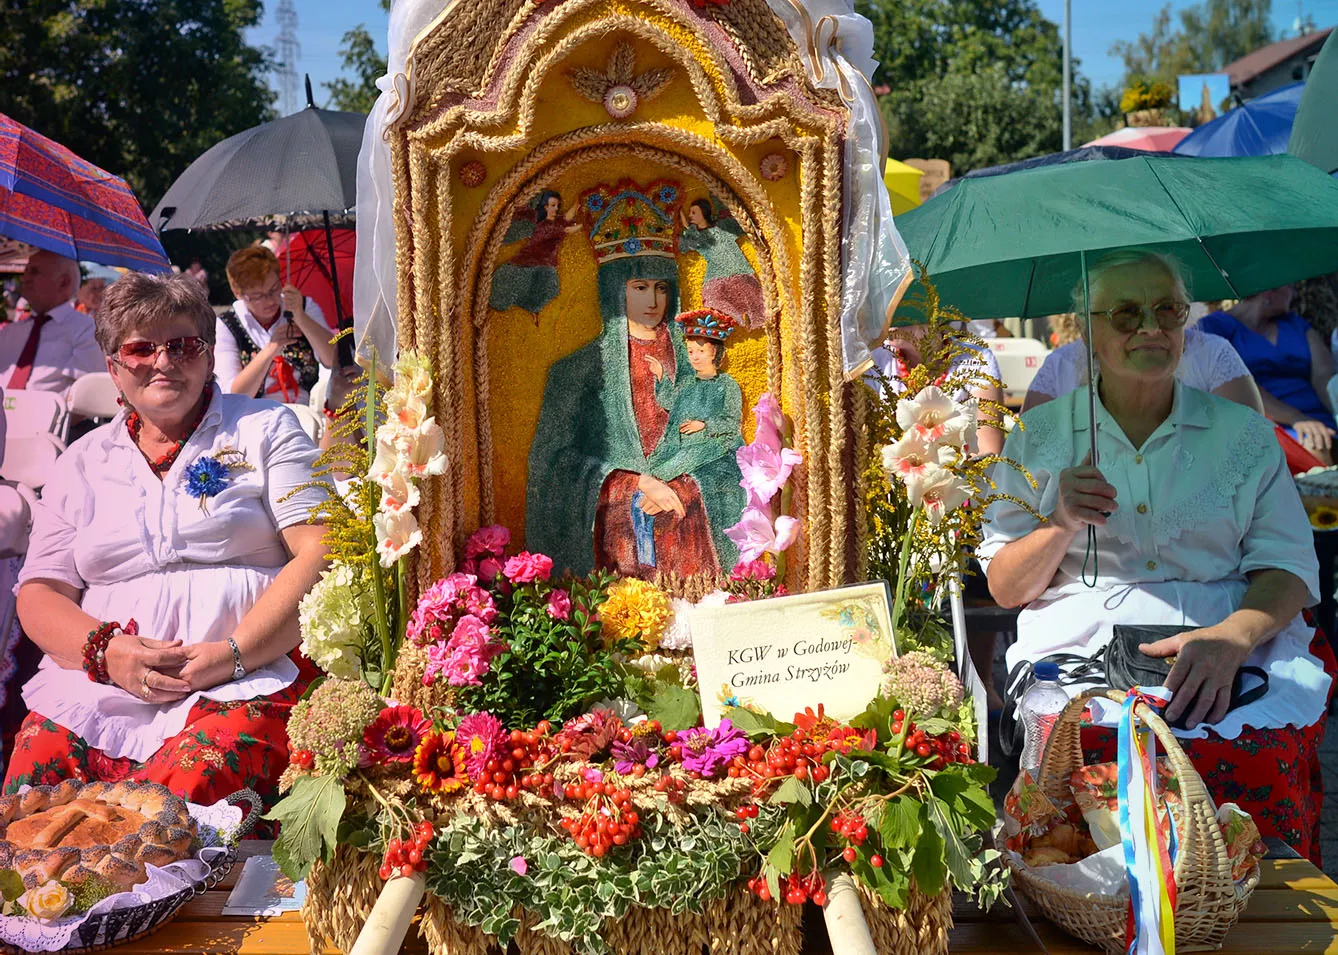 Representatives from Parish Godowa, dressed in traditional folk costumes, seat near their Parish wreaths and loaves during the Holy Mass at the 2015 edition of the annual Harvest Festival in Rzeszow